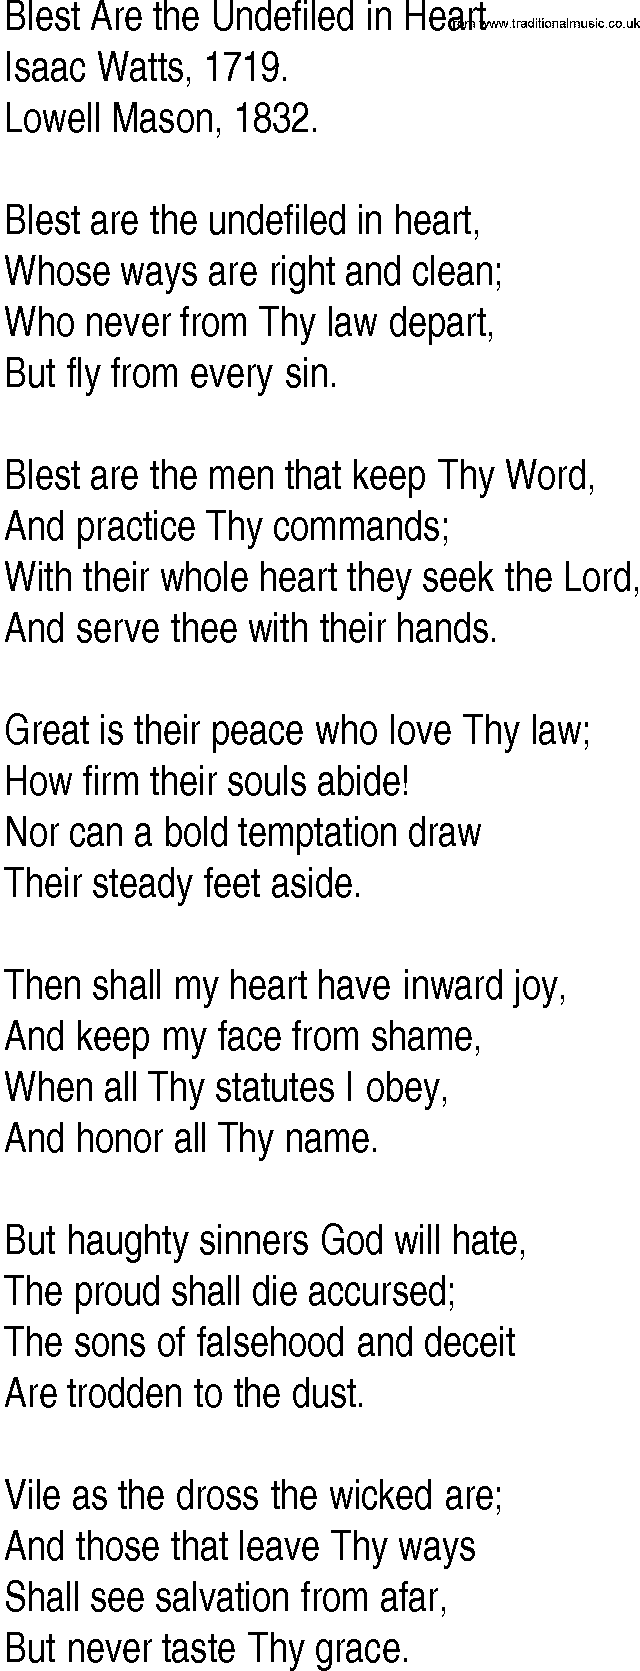 Hymn and Gospel Song: Blest Are the Undefiled in Heart by Isaac Watts lyrics